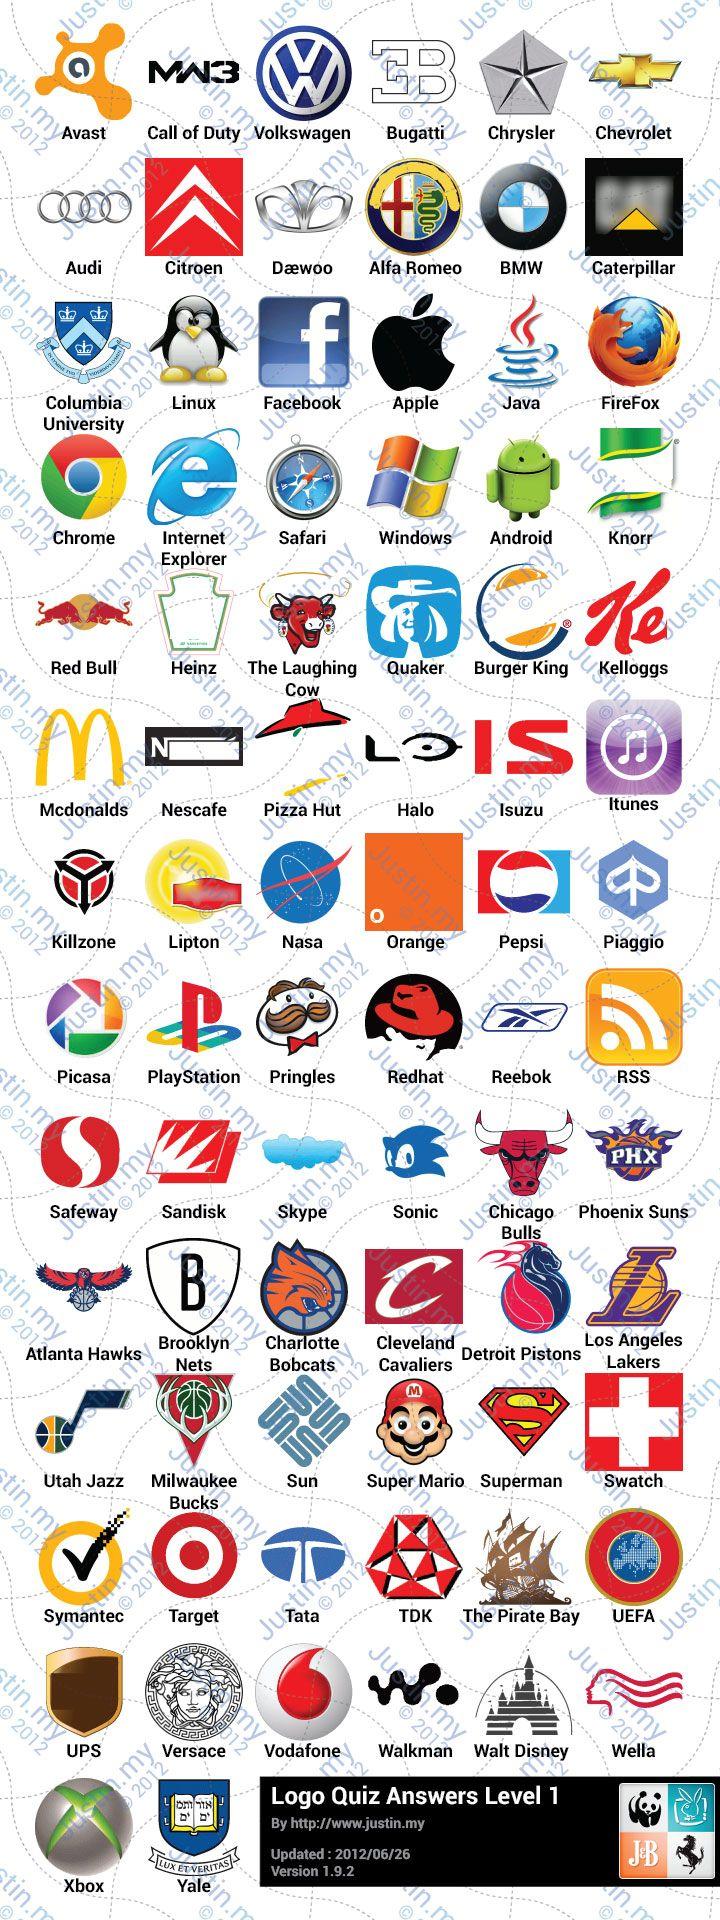 Logos with RAC Guess Logo - Logos Quiz Answers for Addictive Mind Puzzlers – Justin.my